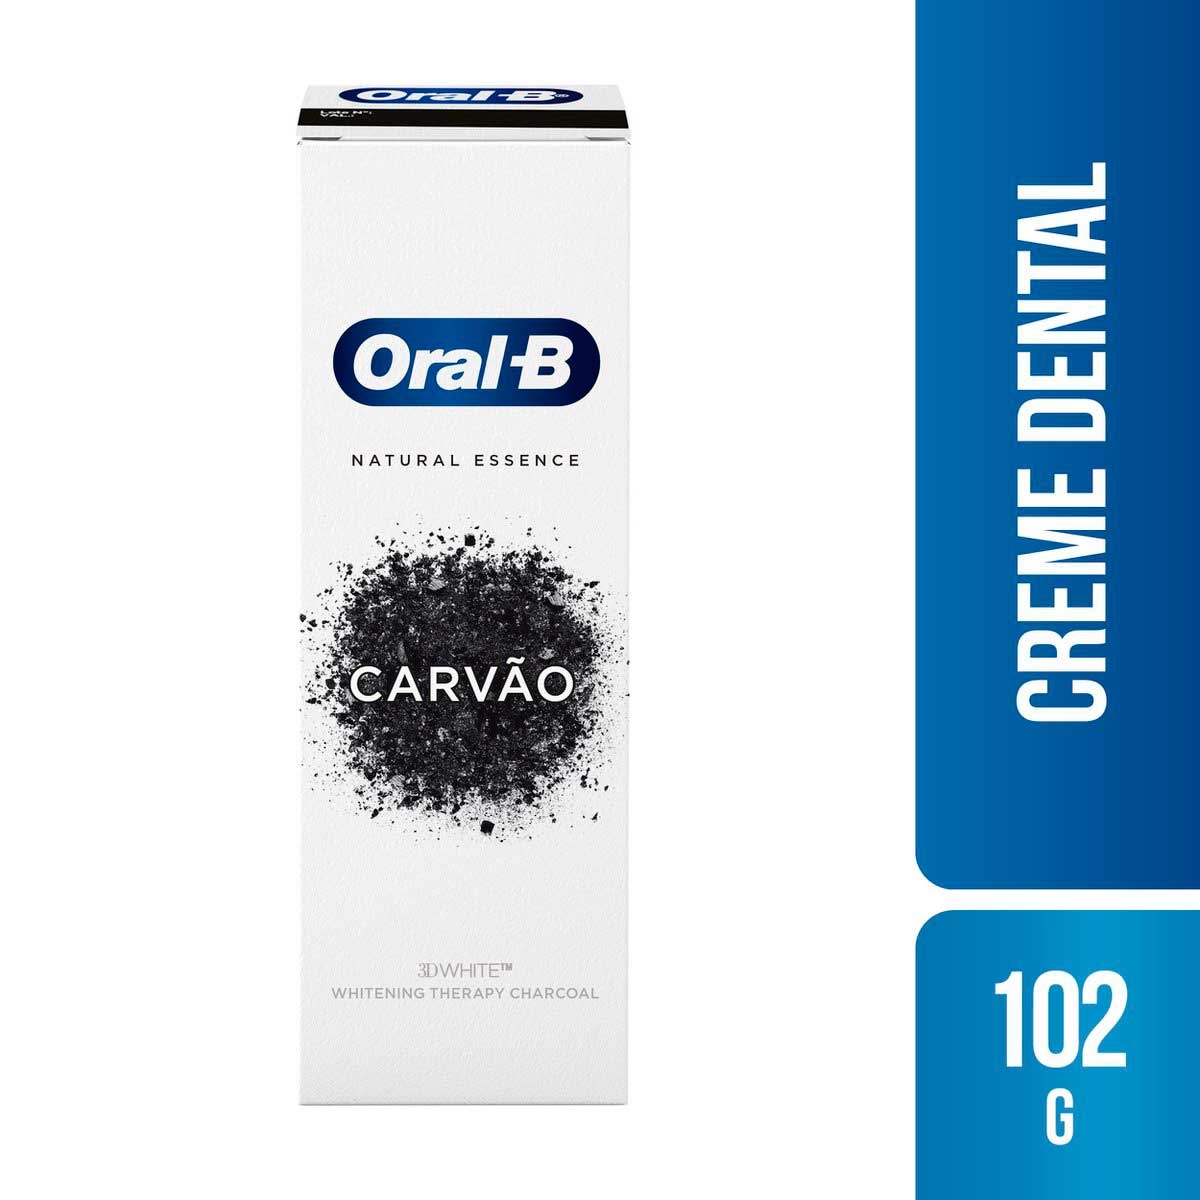 Pasta de Dente Oral-B 3D White Whitening Therapy Purification Charcoal com 102g